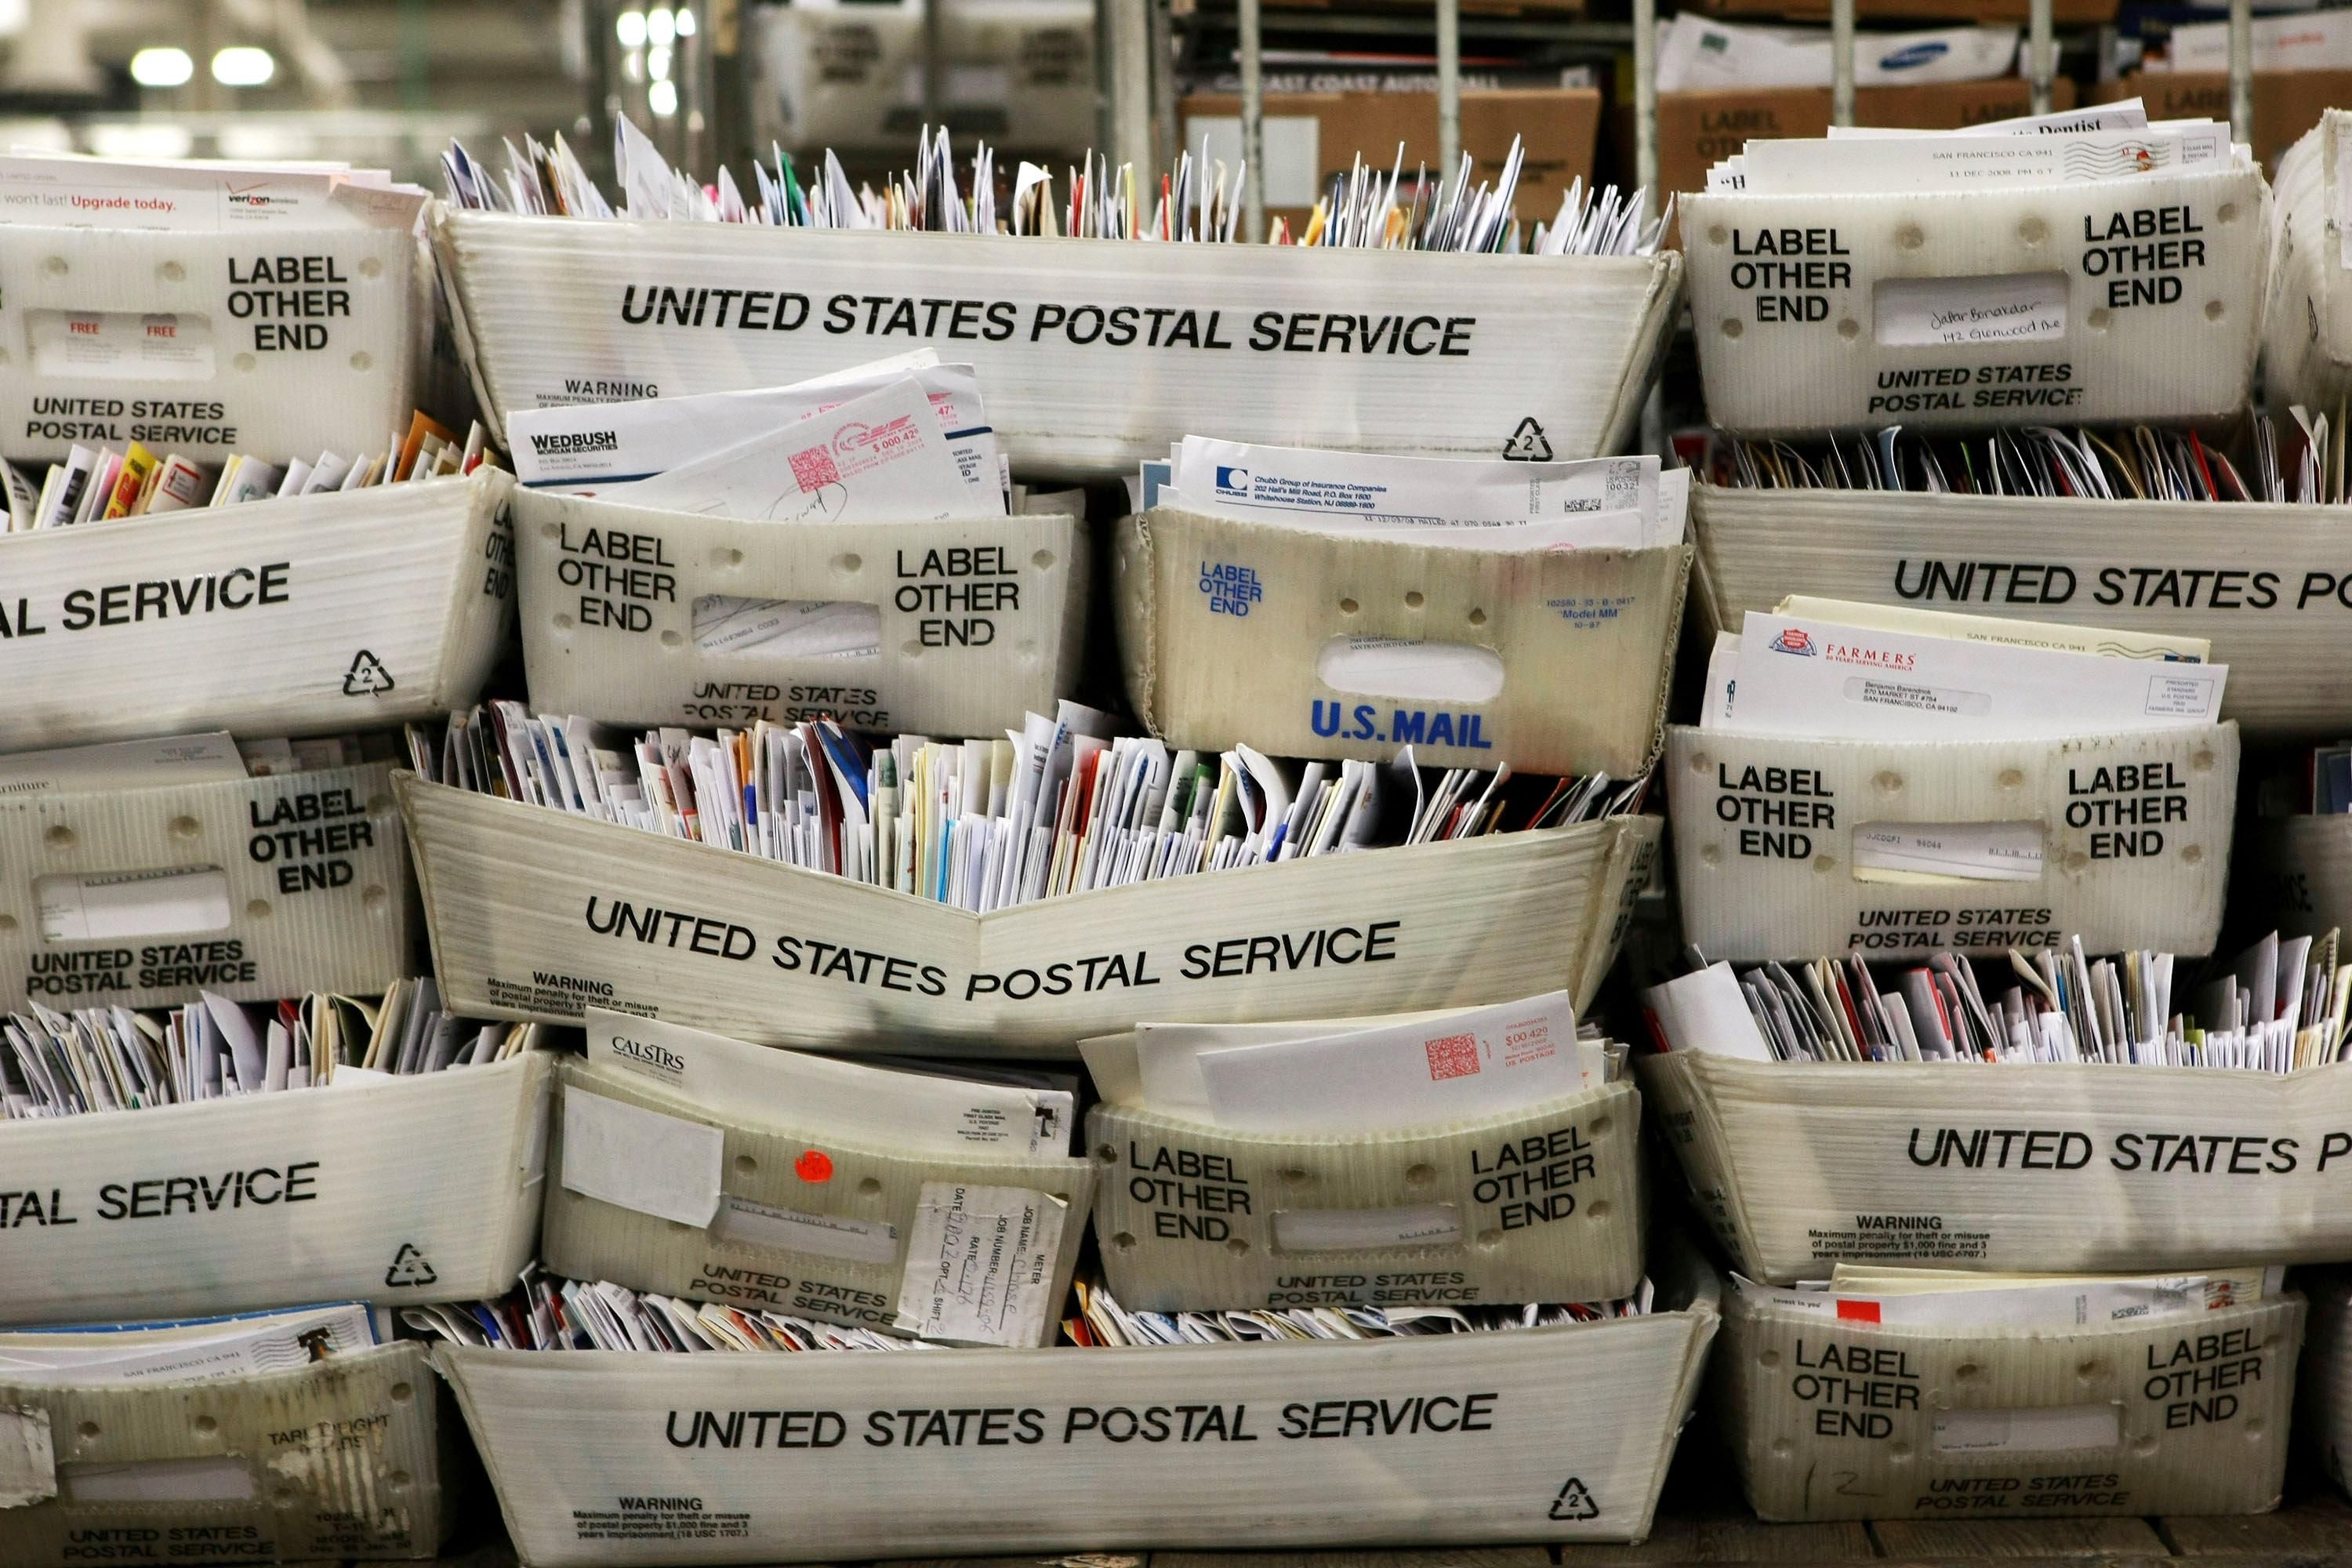 Postal Service packages